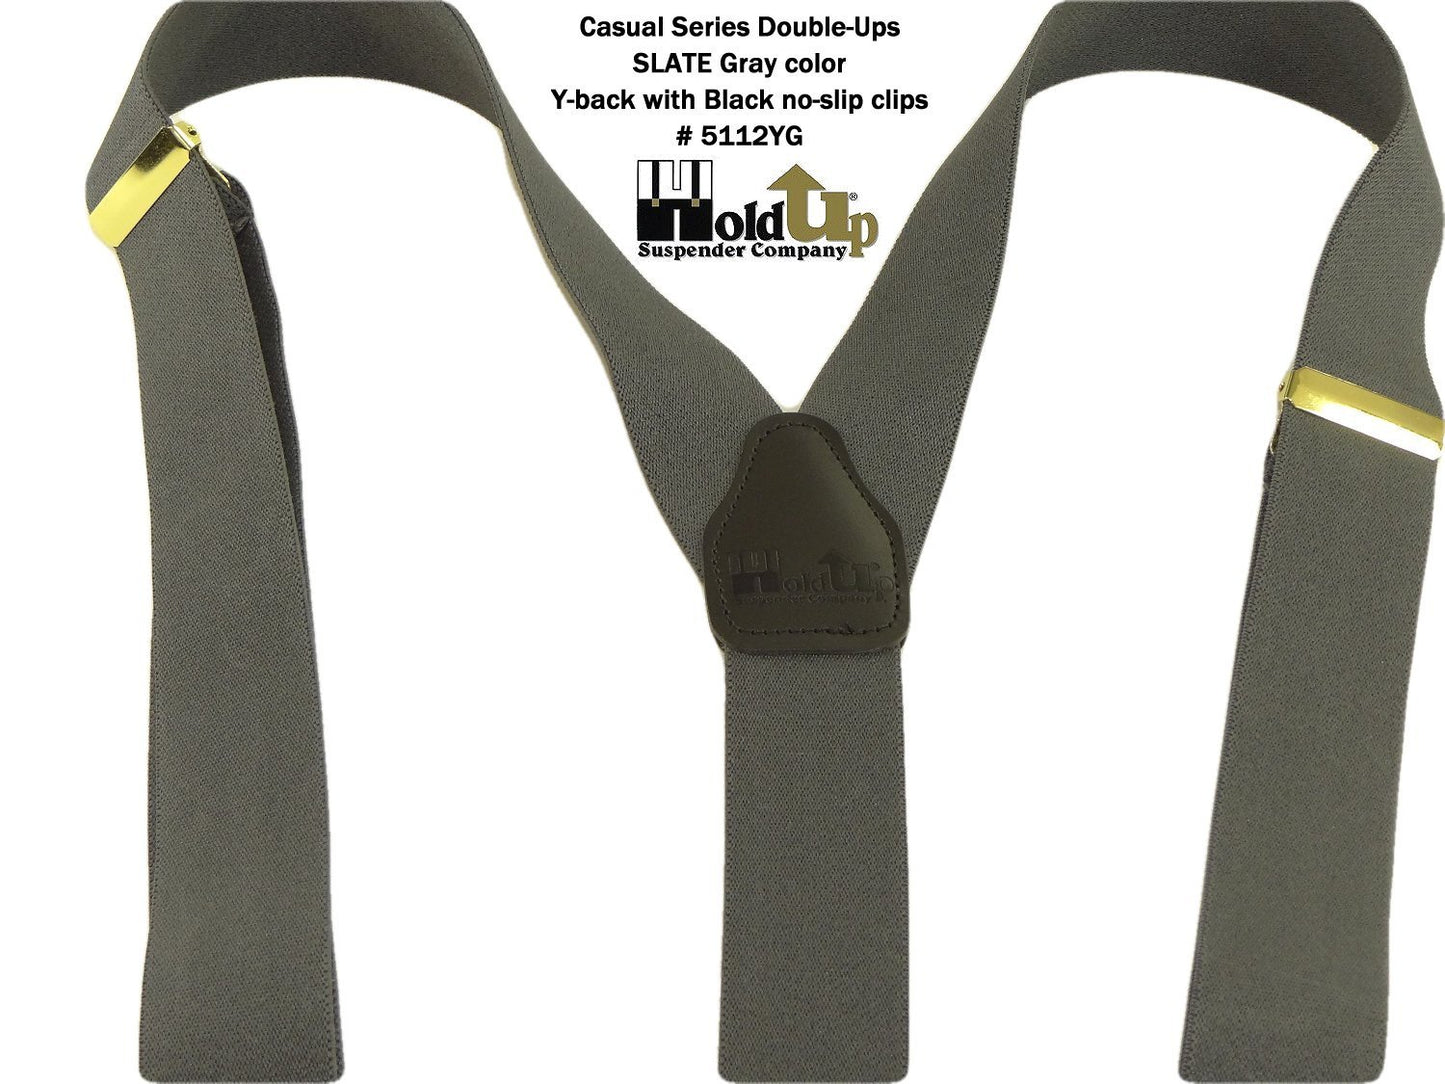 Hold-Ups Slate Grey Casual Series Dual No-slip clip Men's dressy Suspenders with Y-back